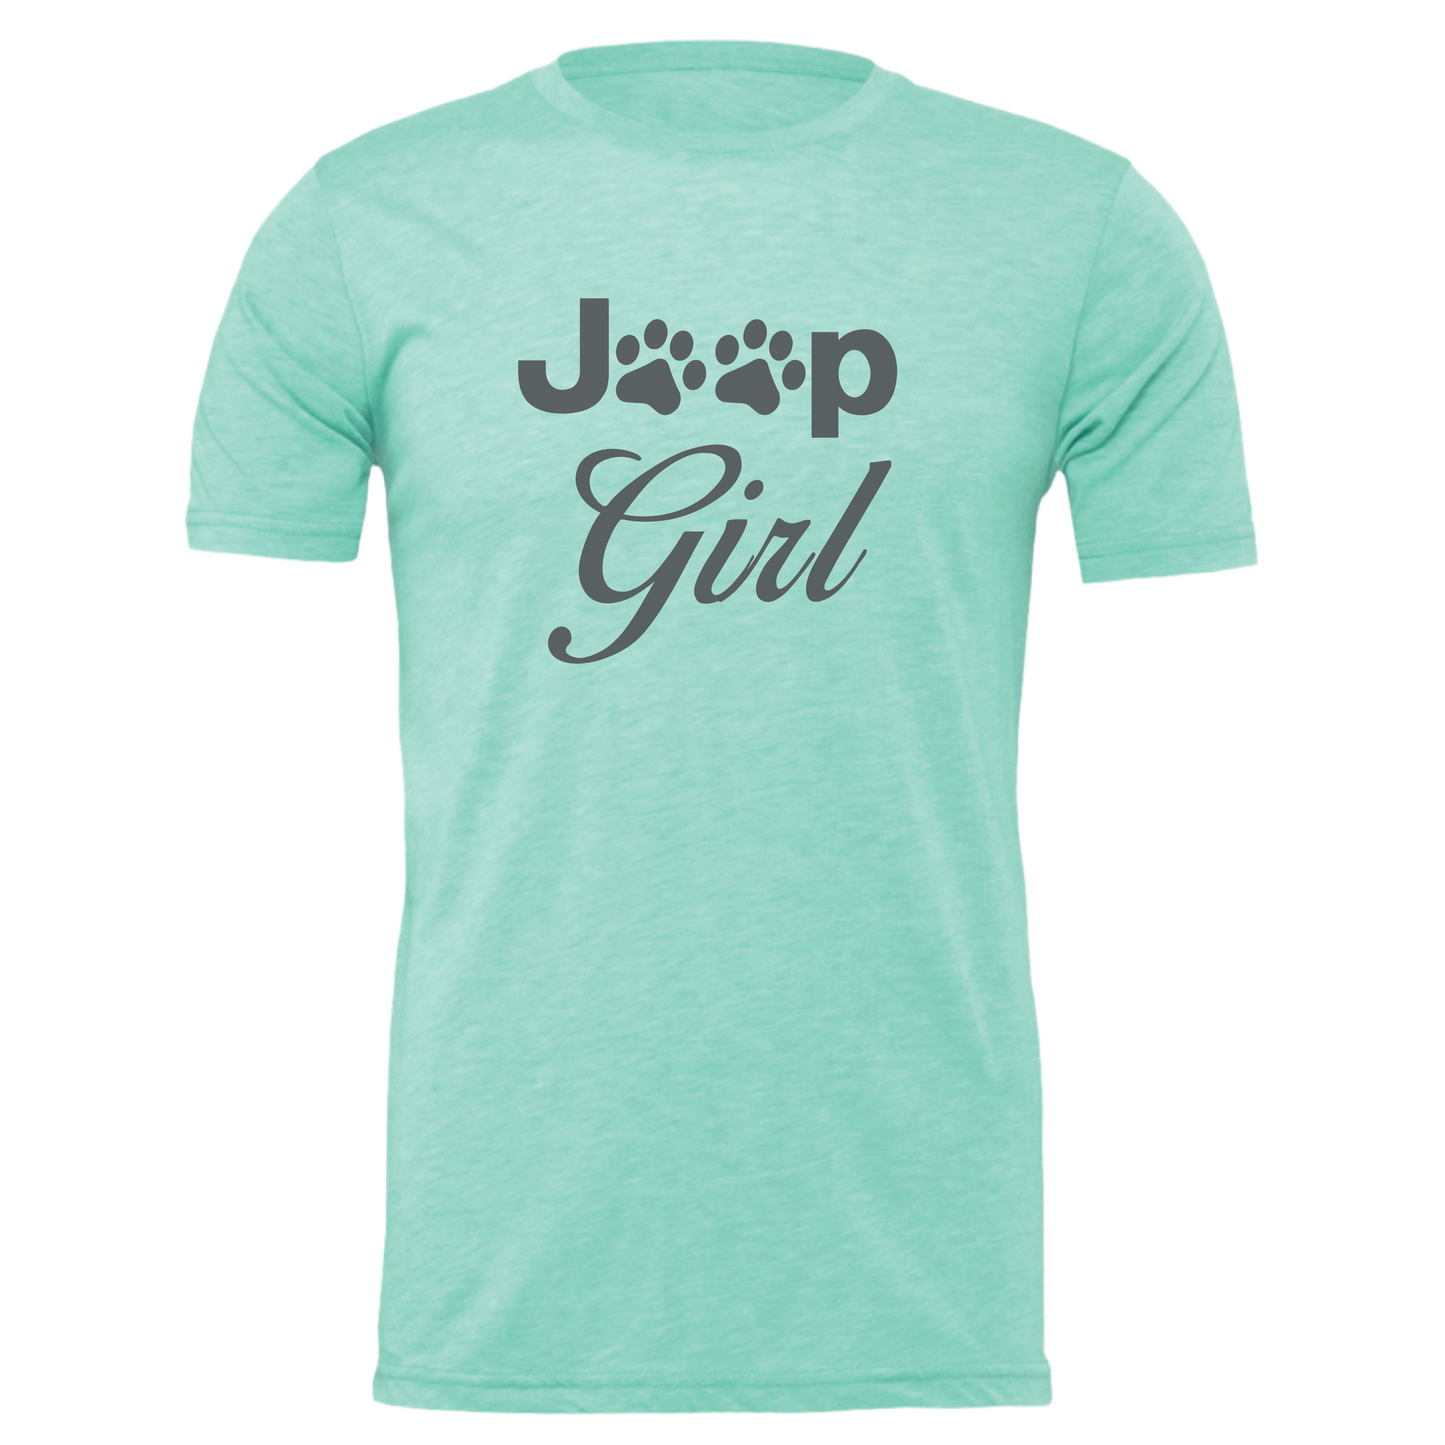 Jeep Girl (Paws) - Shirt, Tank Top, Long Sleeve or Hoodie - Available in Multiple Colors